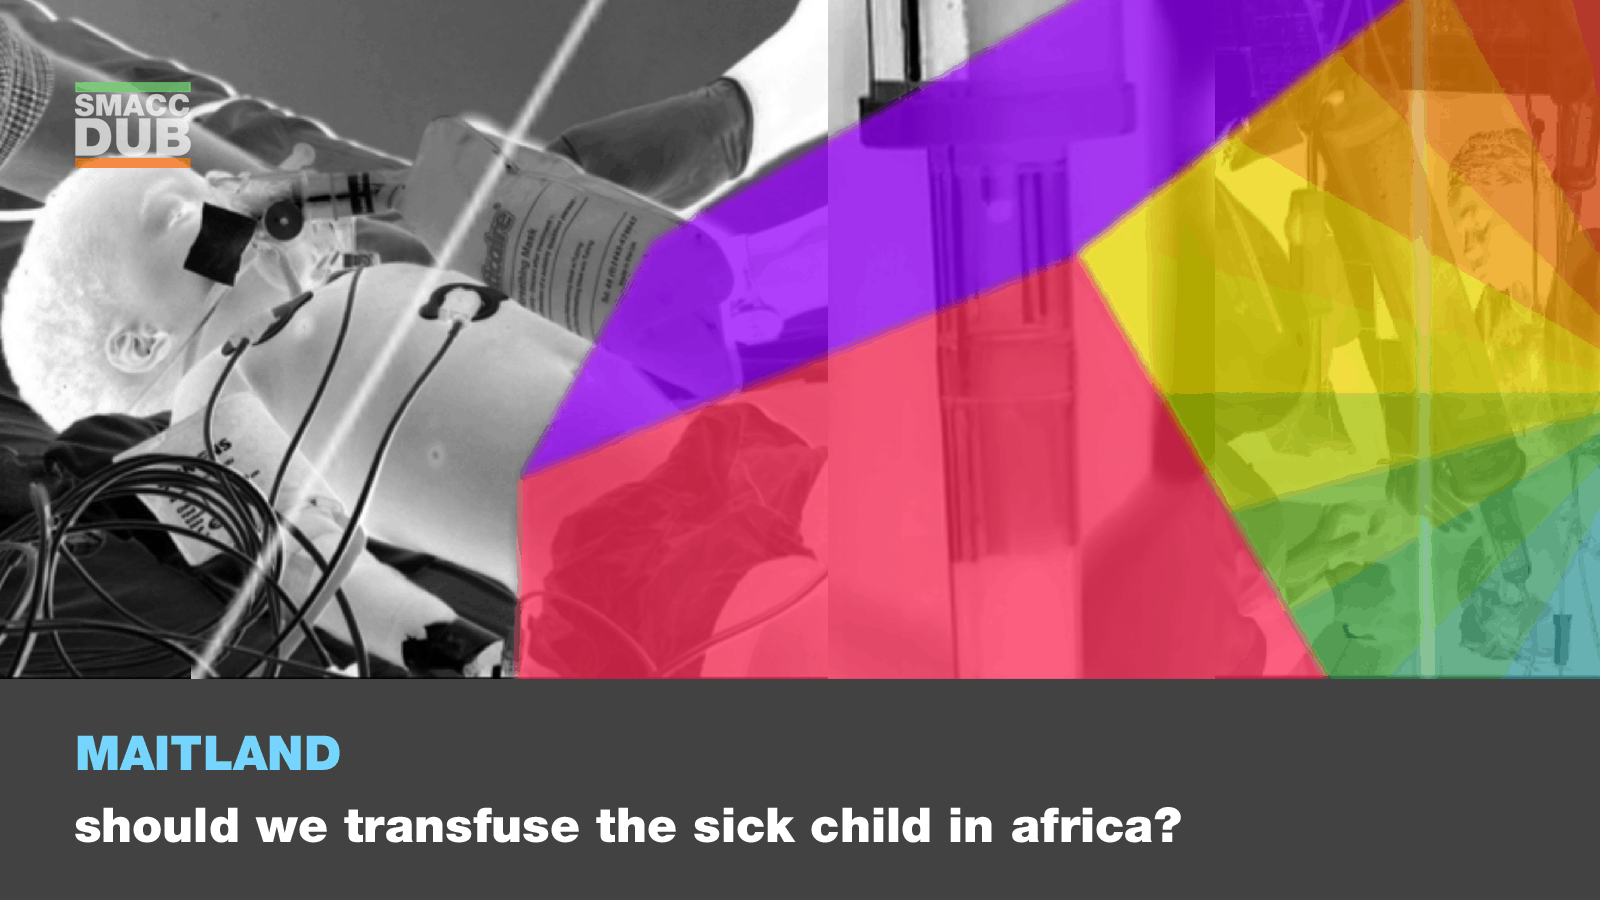 Maitland - Should we transfuse the sick child in Africa